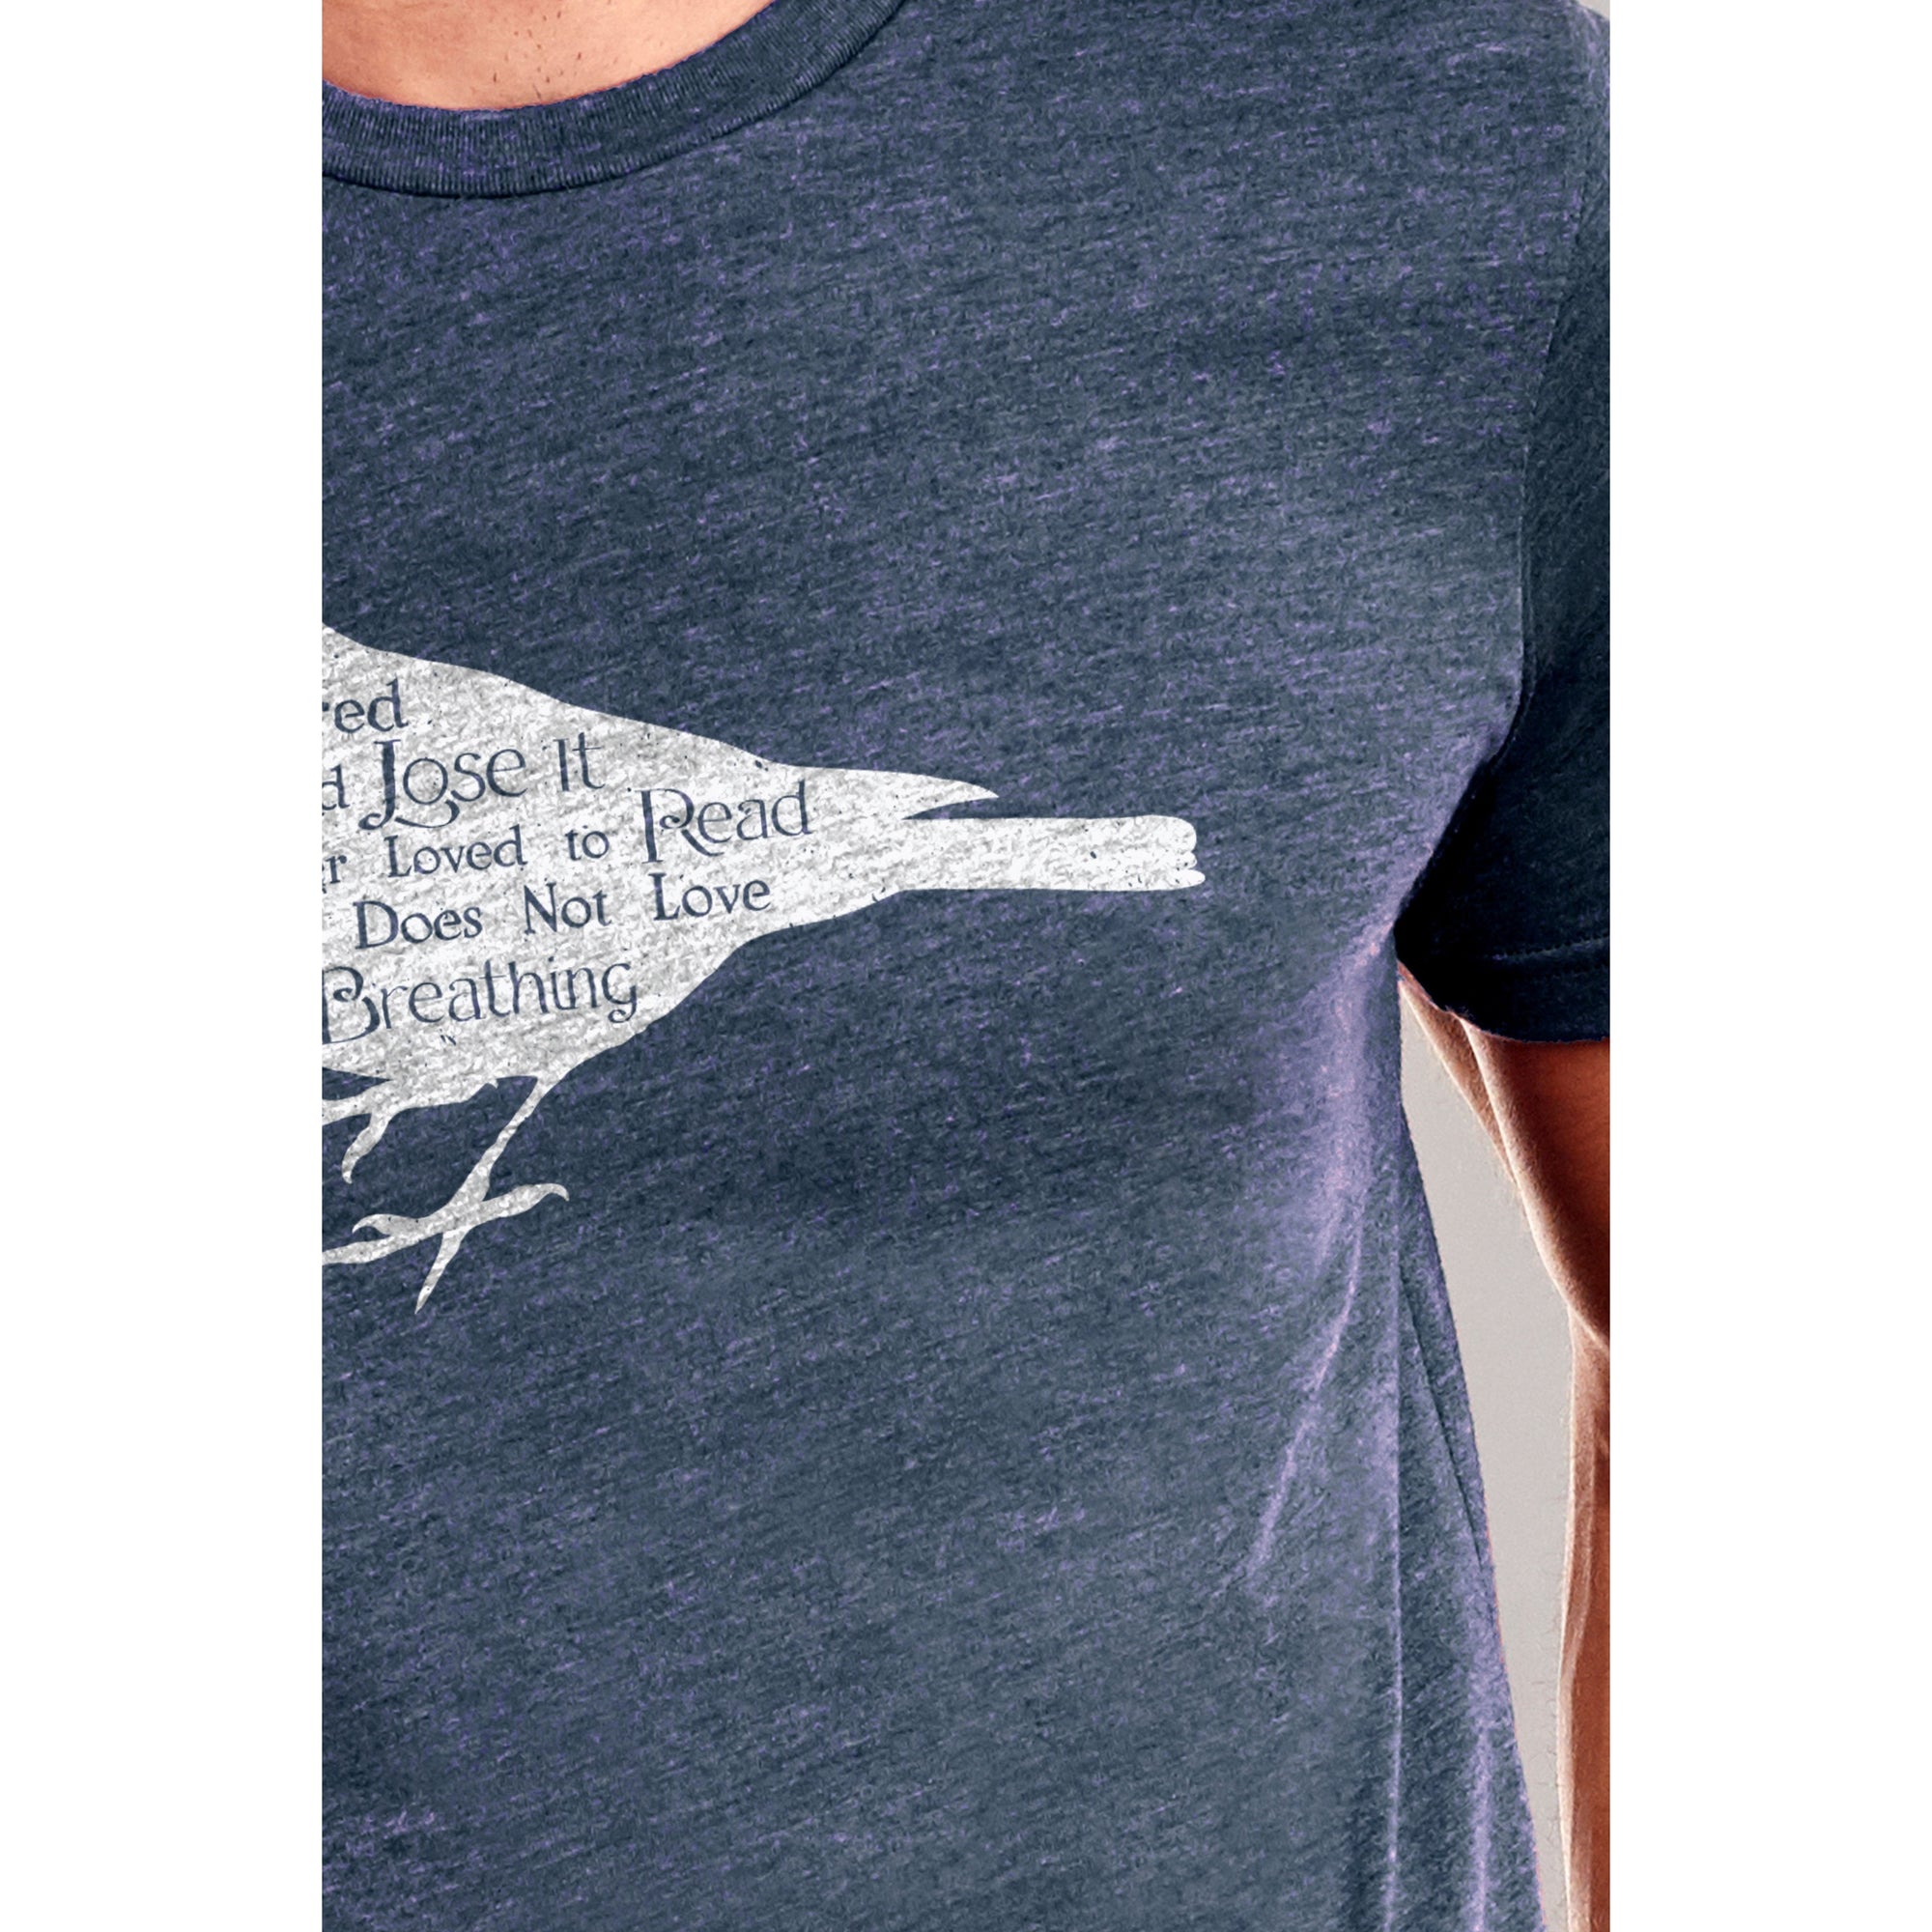 Until I Feared I Would Lose It, I Never Loved To Read. One Does Not Love Breathing. (Reference: To Kill A Mockingbird) - threadtank | stories you can wear